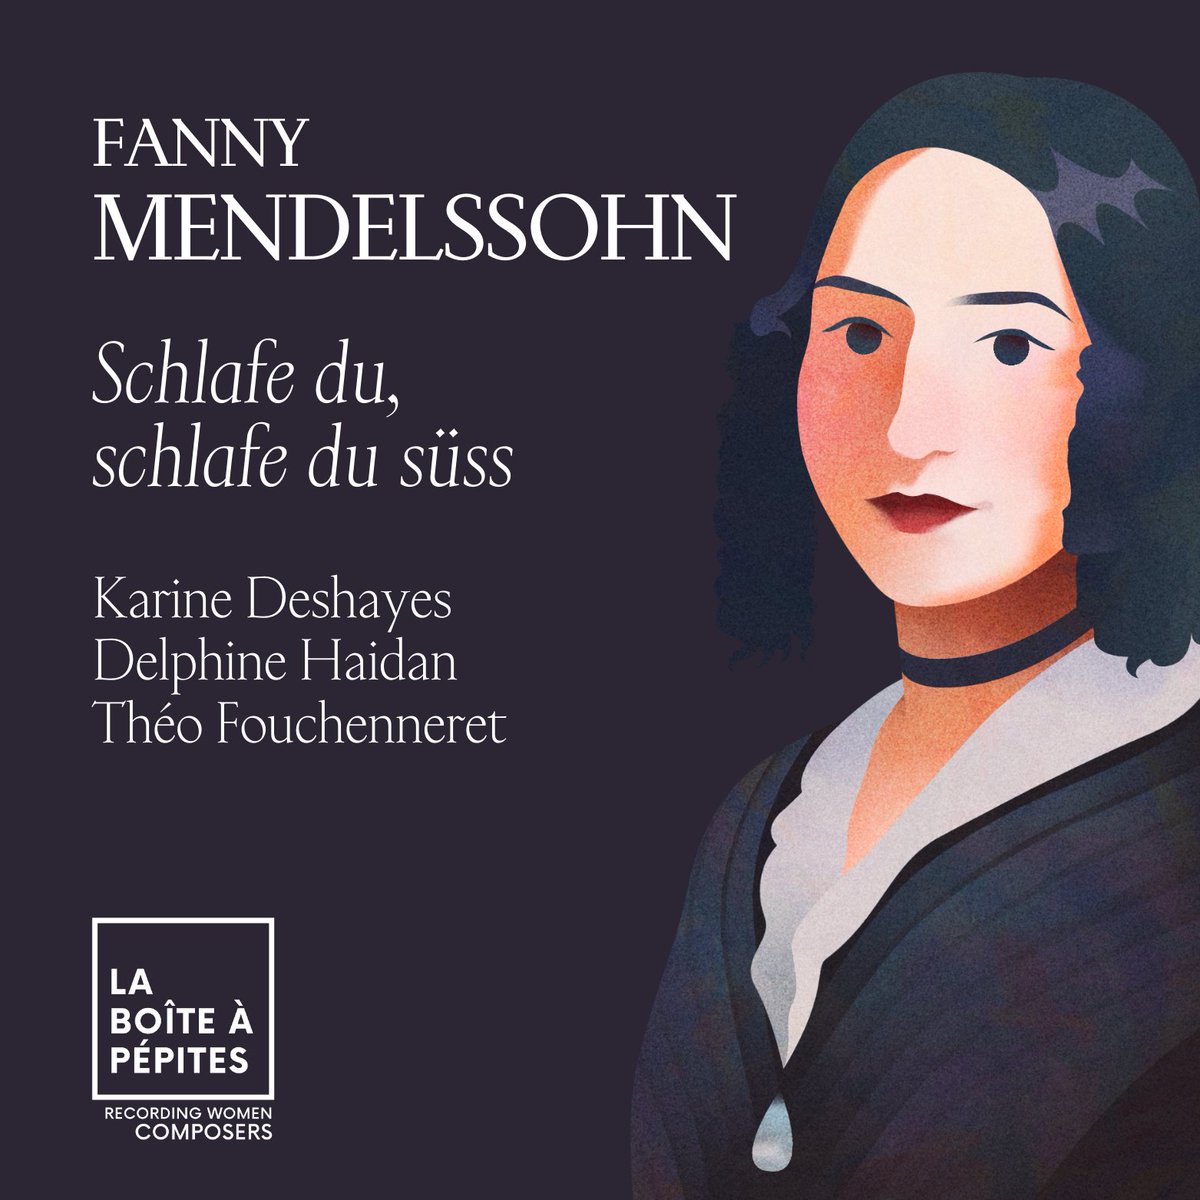 The tenderness of #FannyMendelssohn's lullaby, the sweetness of #KarineDeshayes's & #DelphineHaidan's voices and #TheoFouchenneret's piano... 'Schlafe du, schlafe du süss' is #NowStreaming 🌙

fanlink.to/fanny-mendelss…